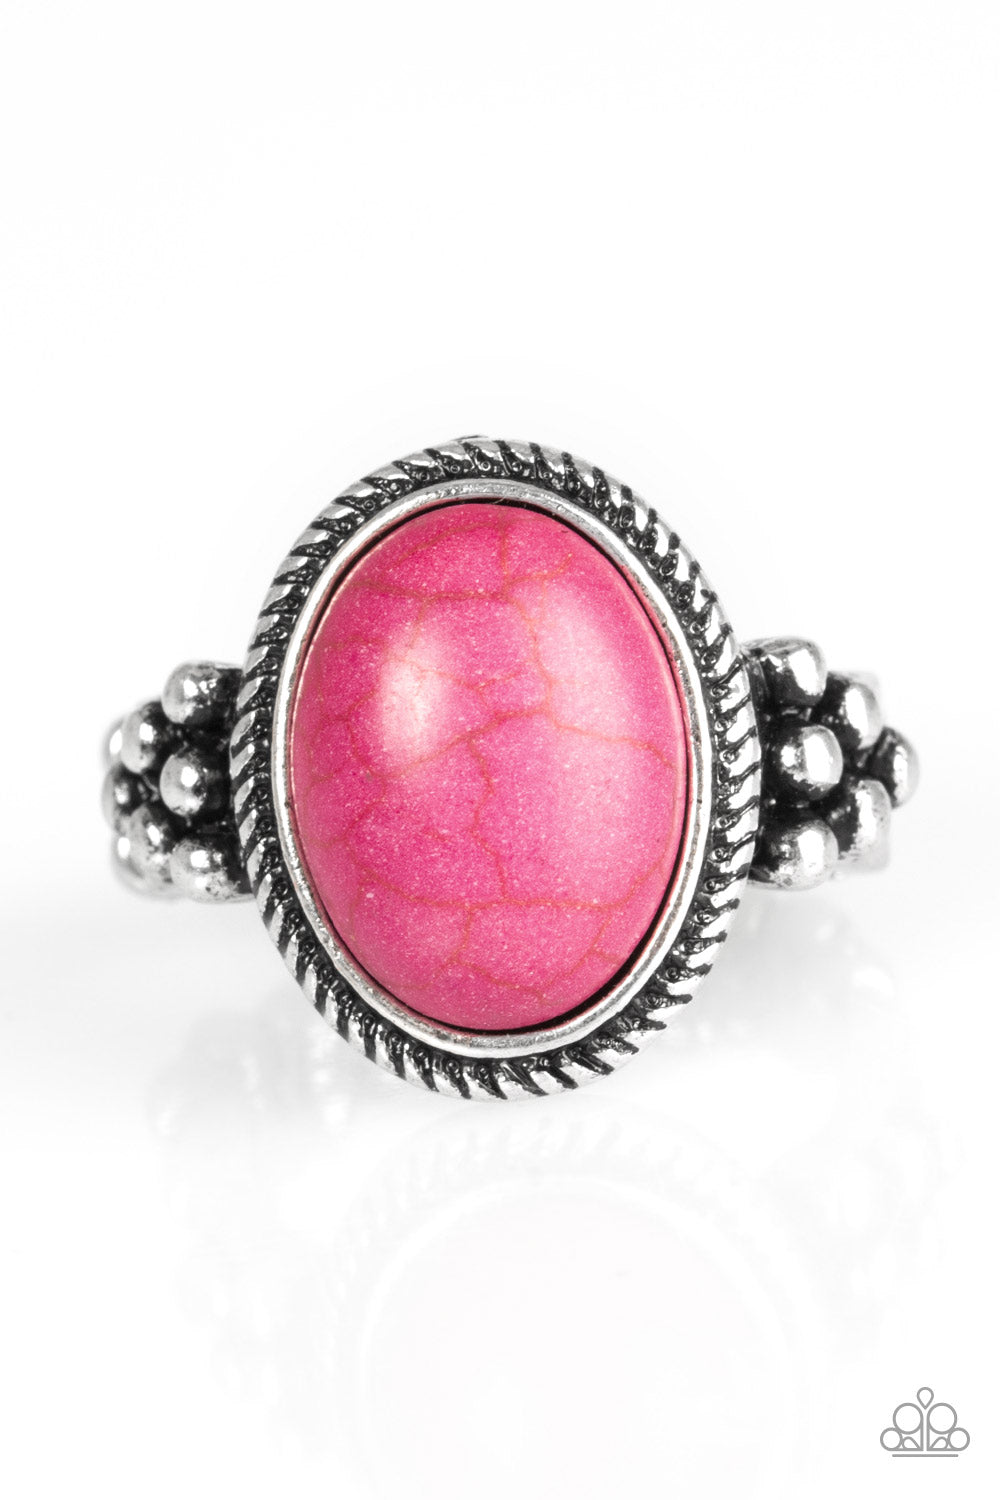 Stone Age Sophistication - Pink